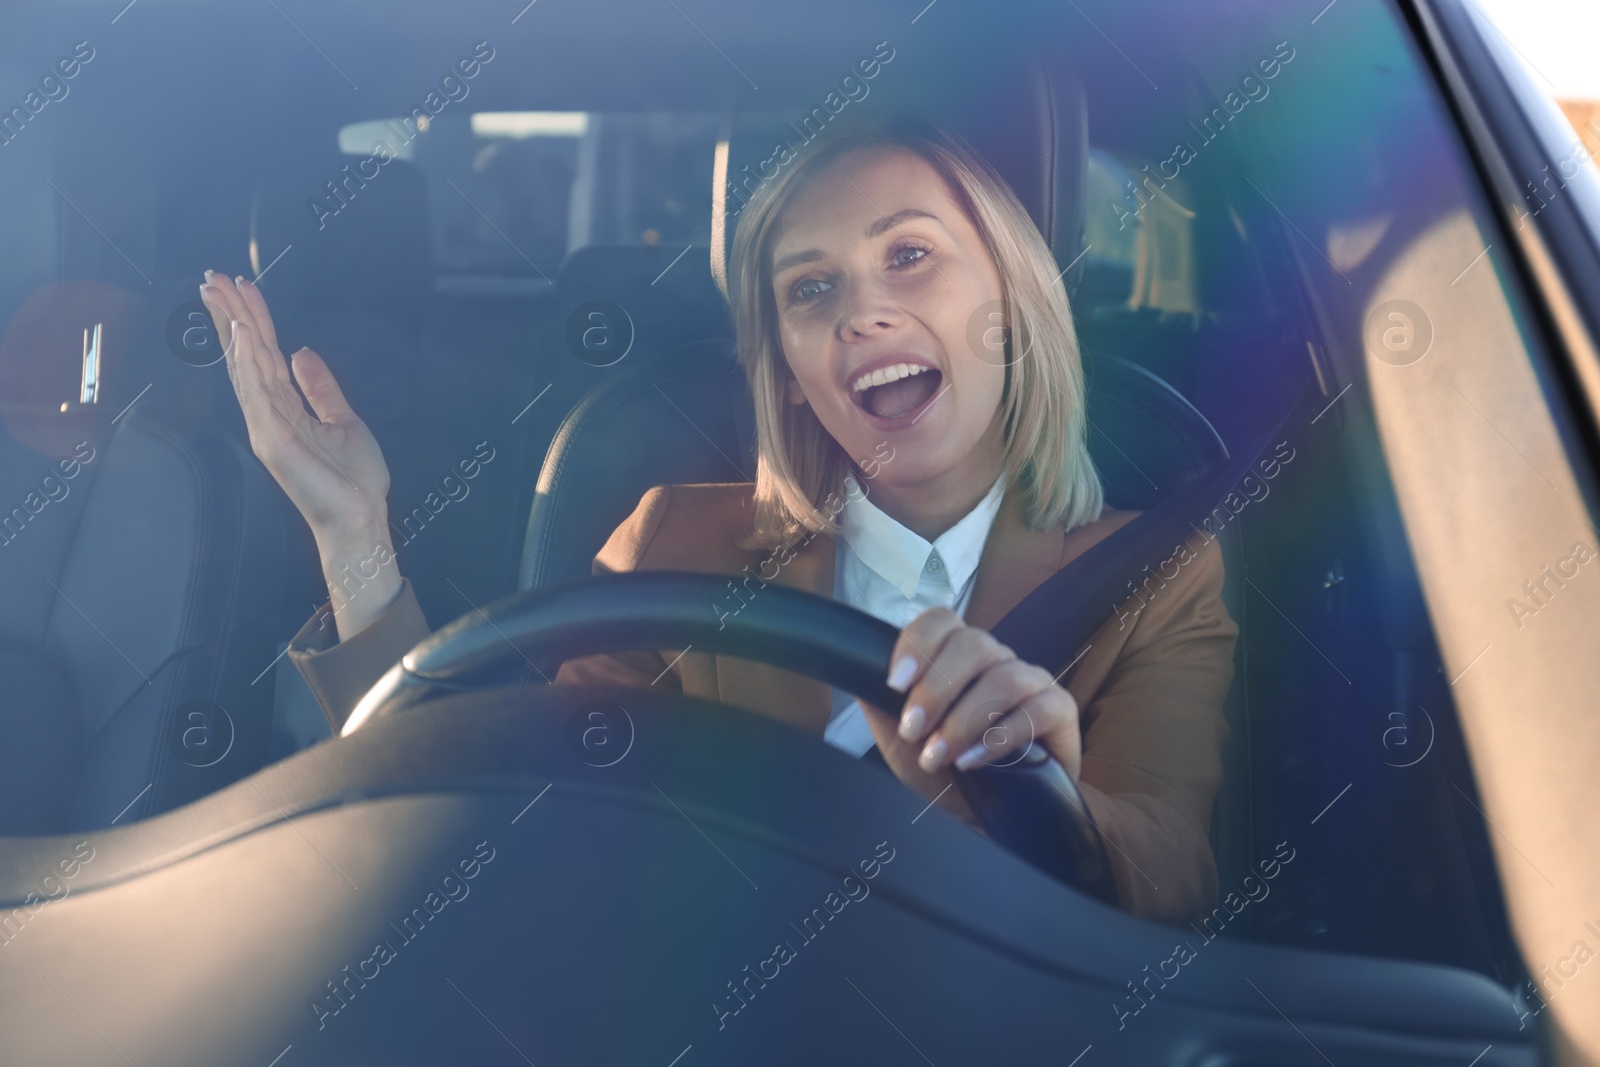 Photo of Woman singing in car, view through windshield